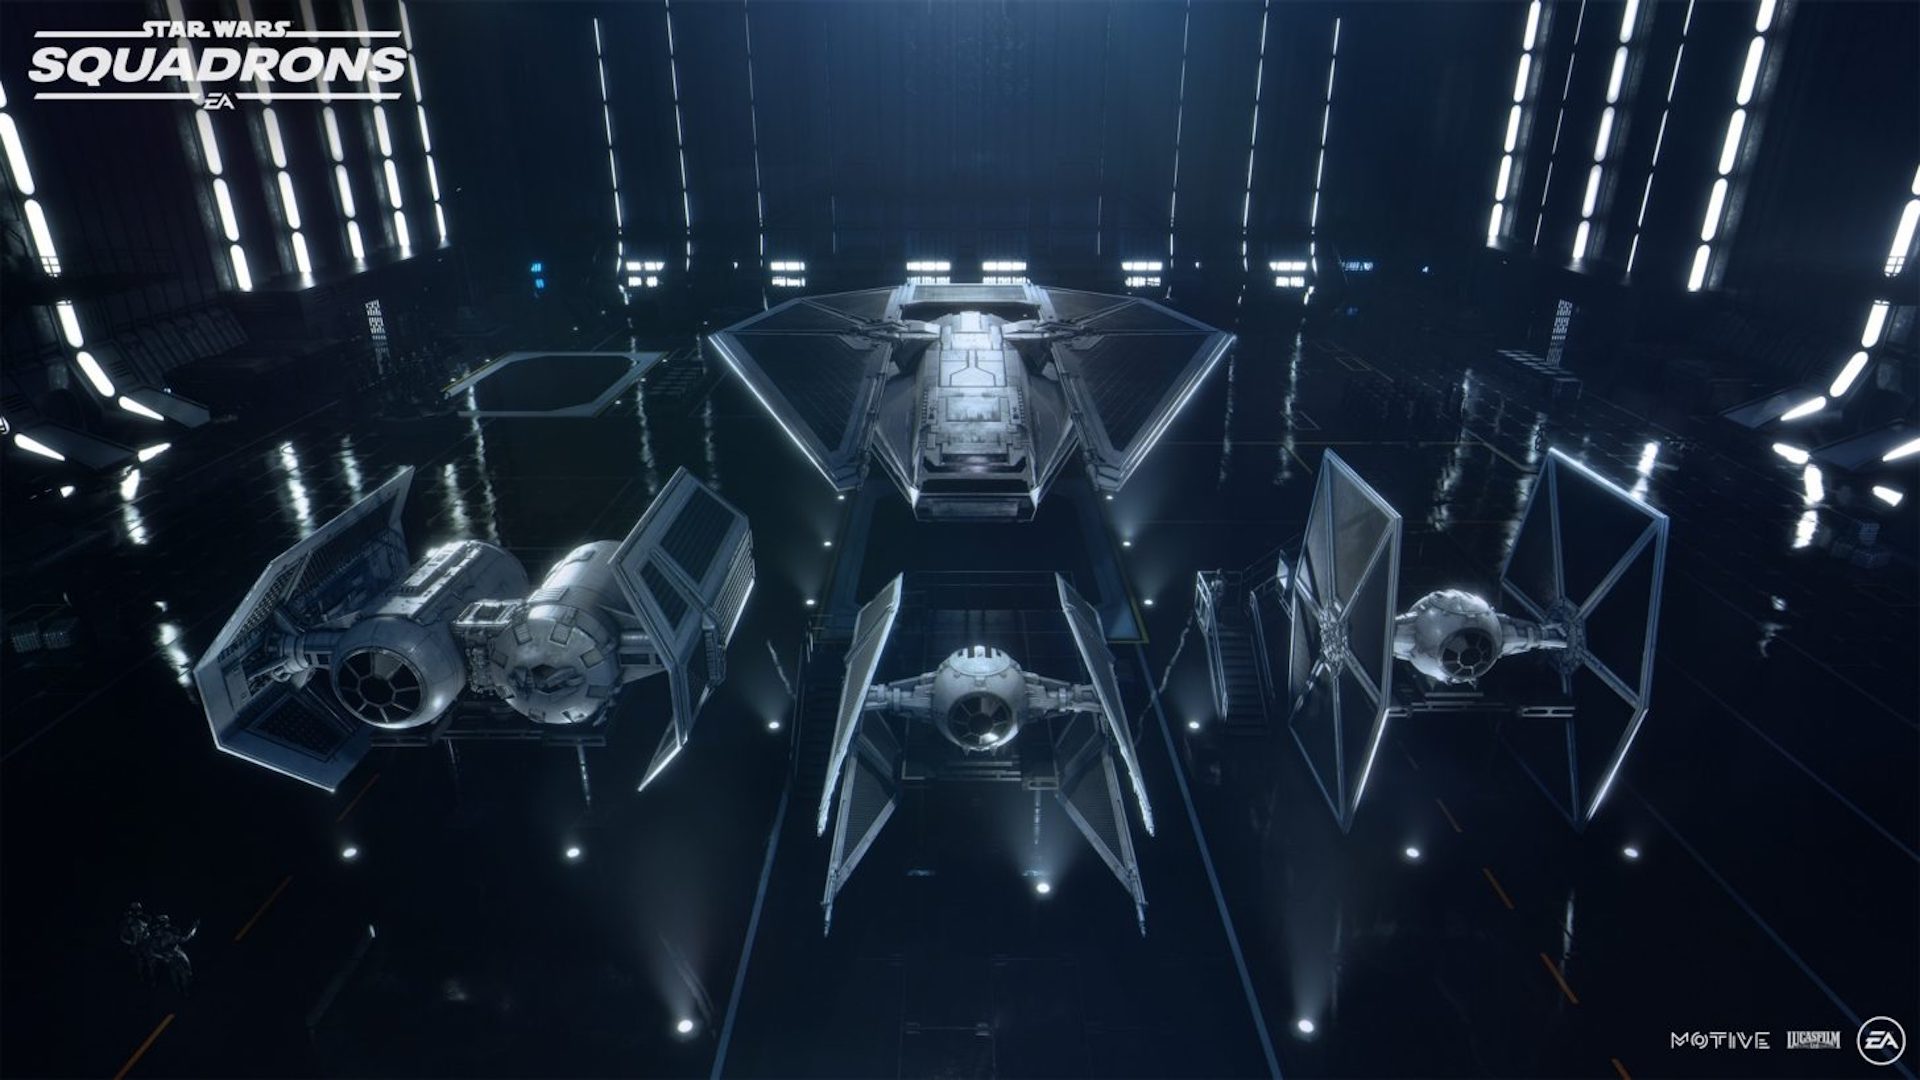 Star Wars: Squadrons Showcases Campaign Gameplay In New Video